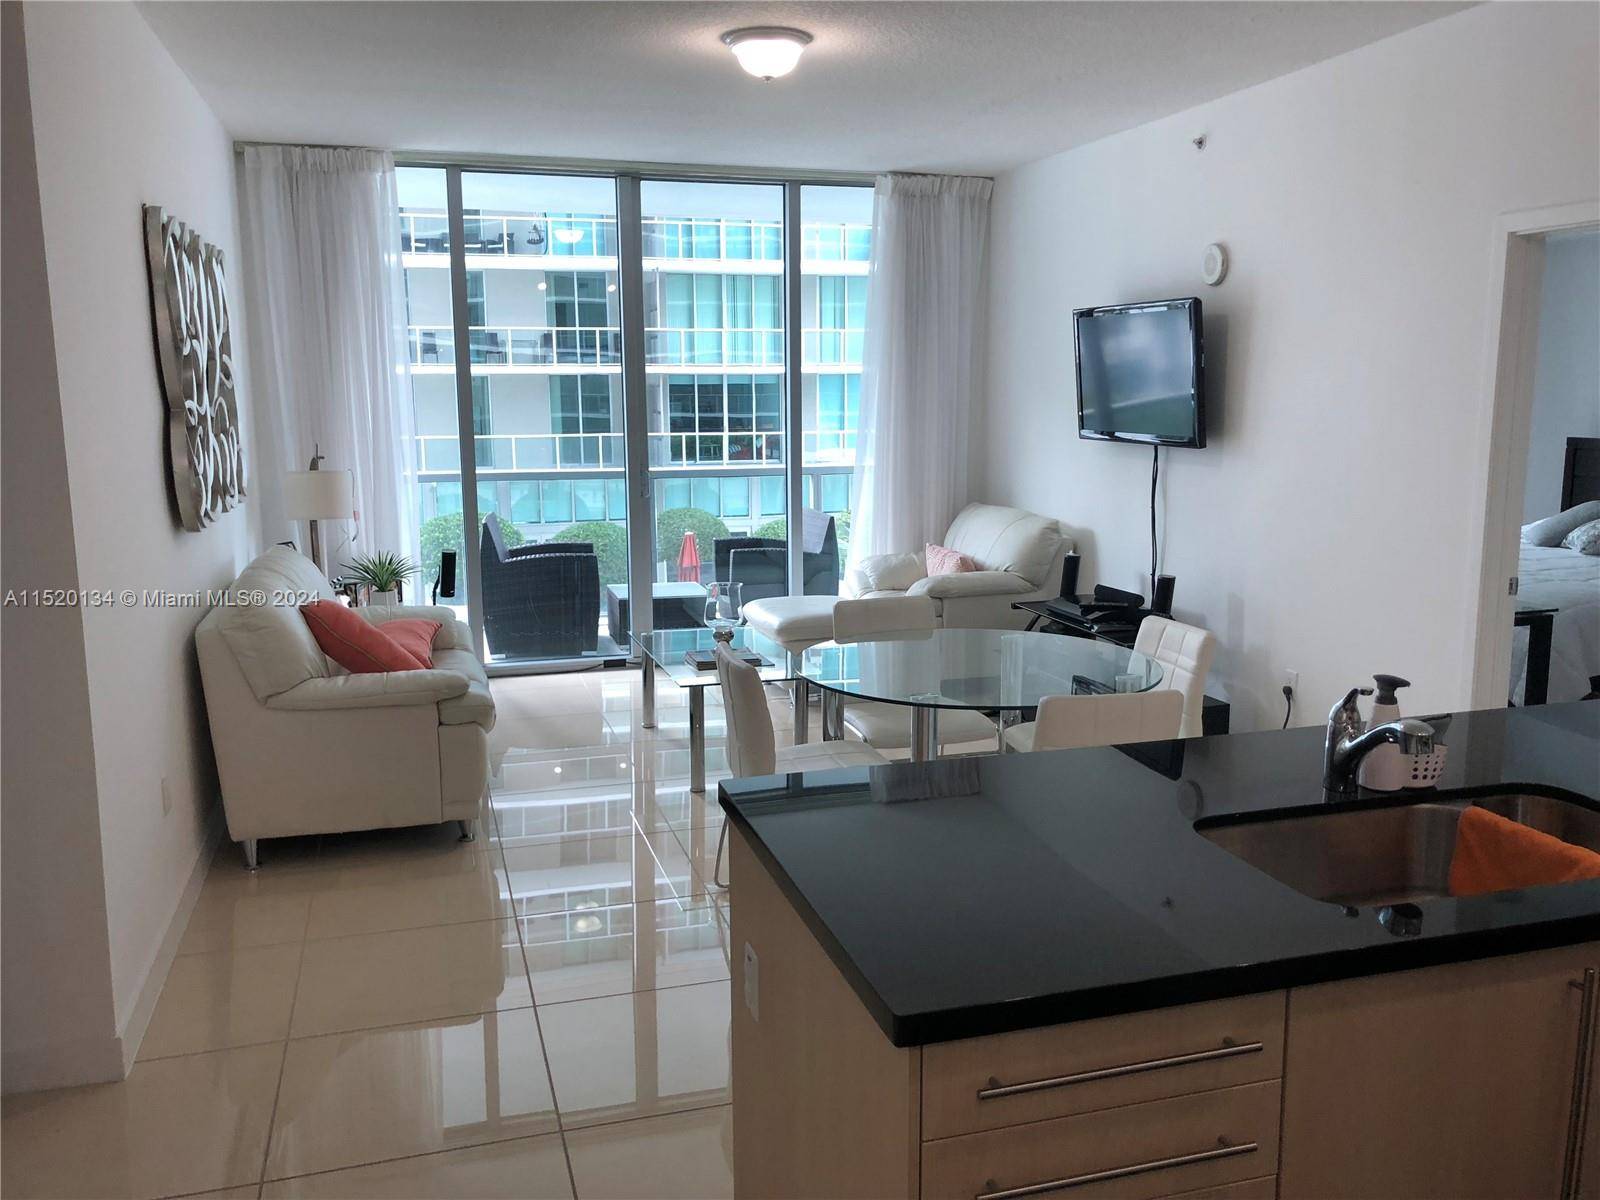 Fully furnished 2 bedroom, 2 bathroom unit with beautiful south views towards the pool and common areas.